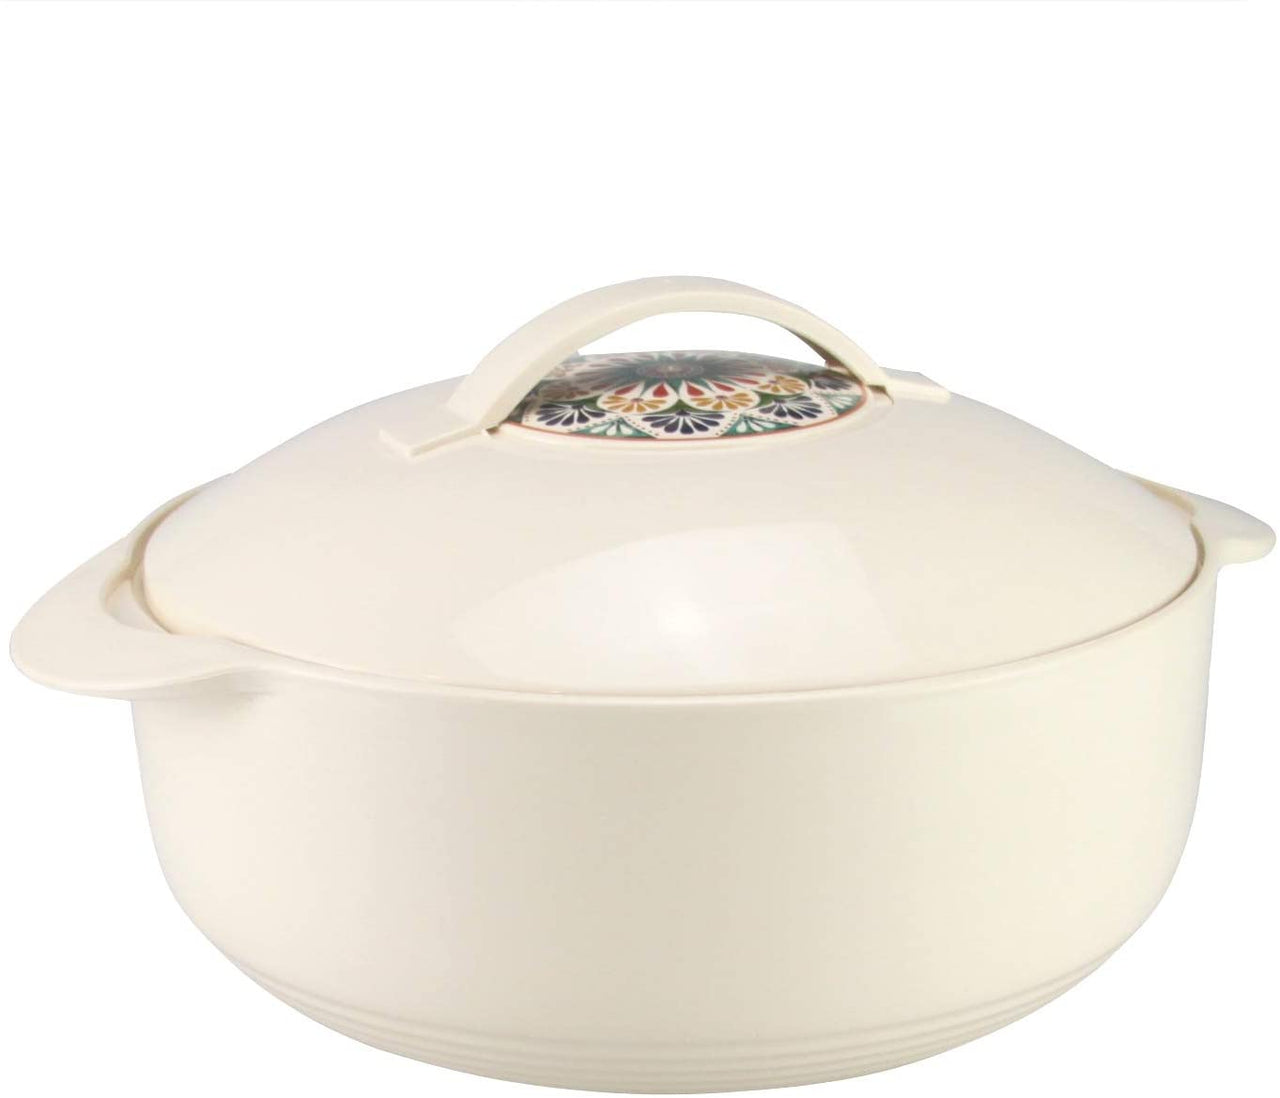 Leo Insulated Casserole Hot Pot Serving Bowl With Lid-Food Warmer